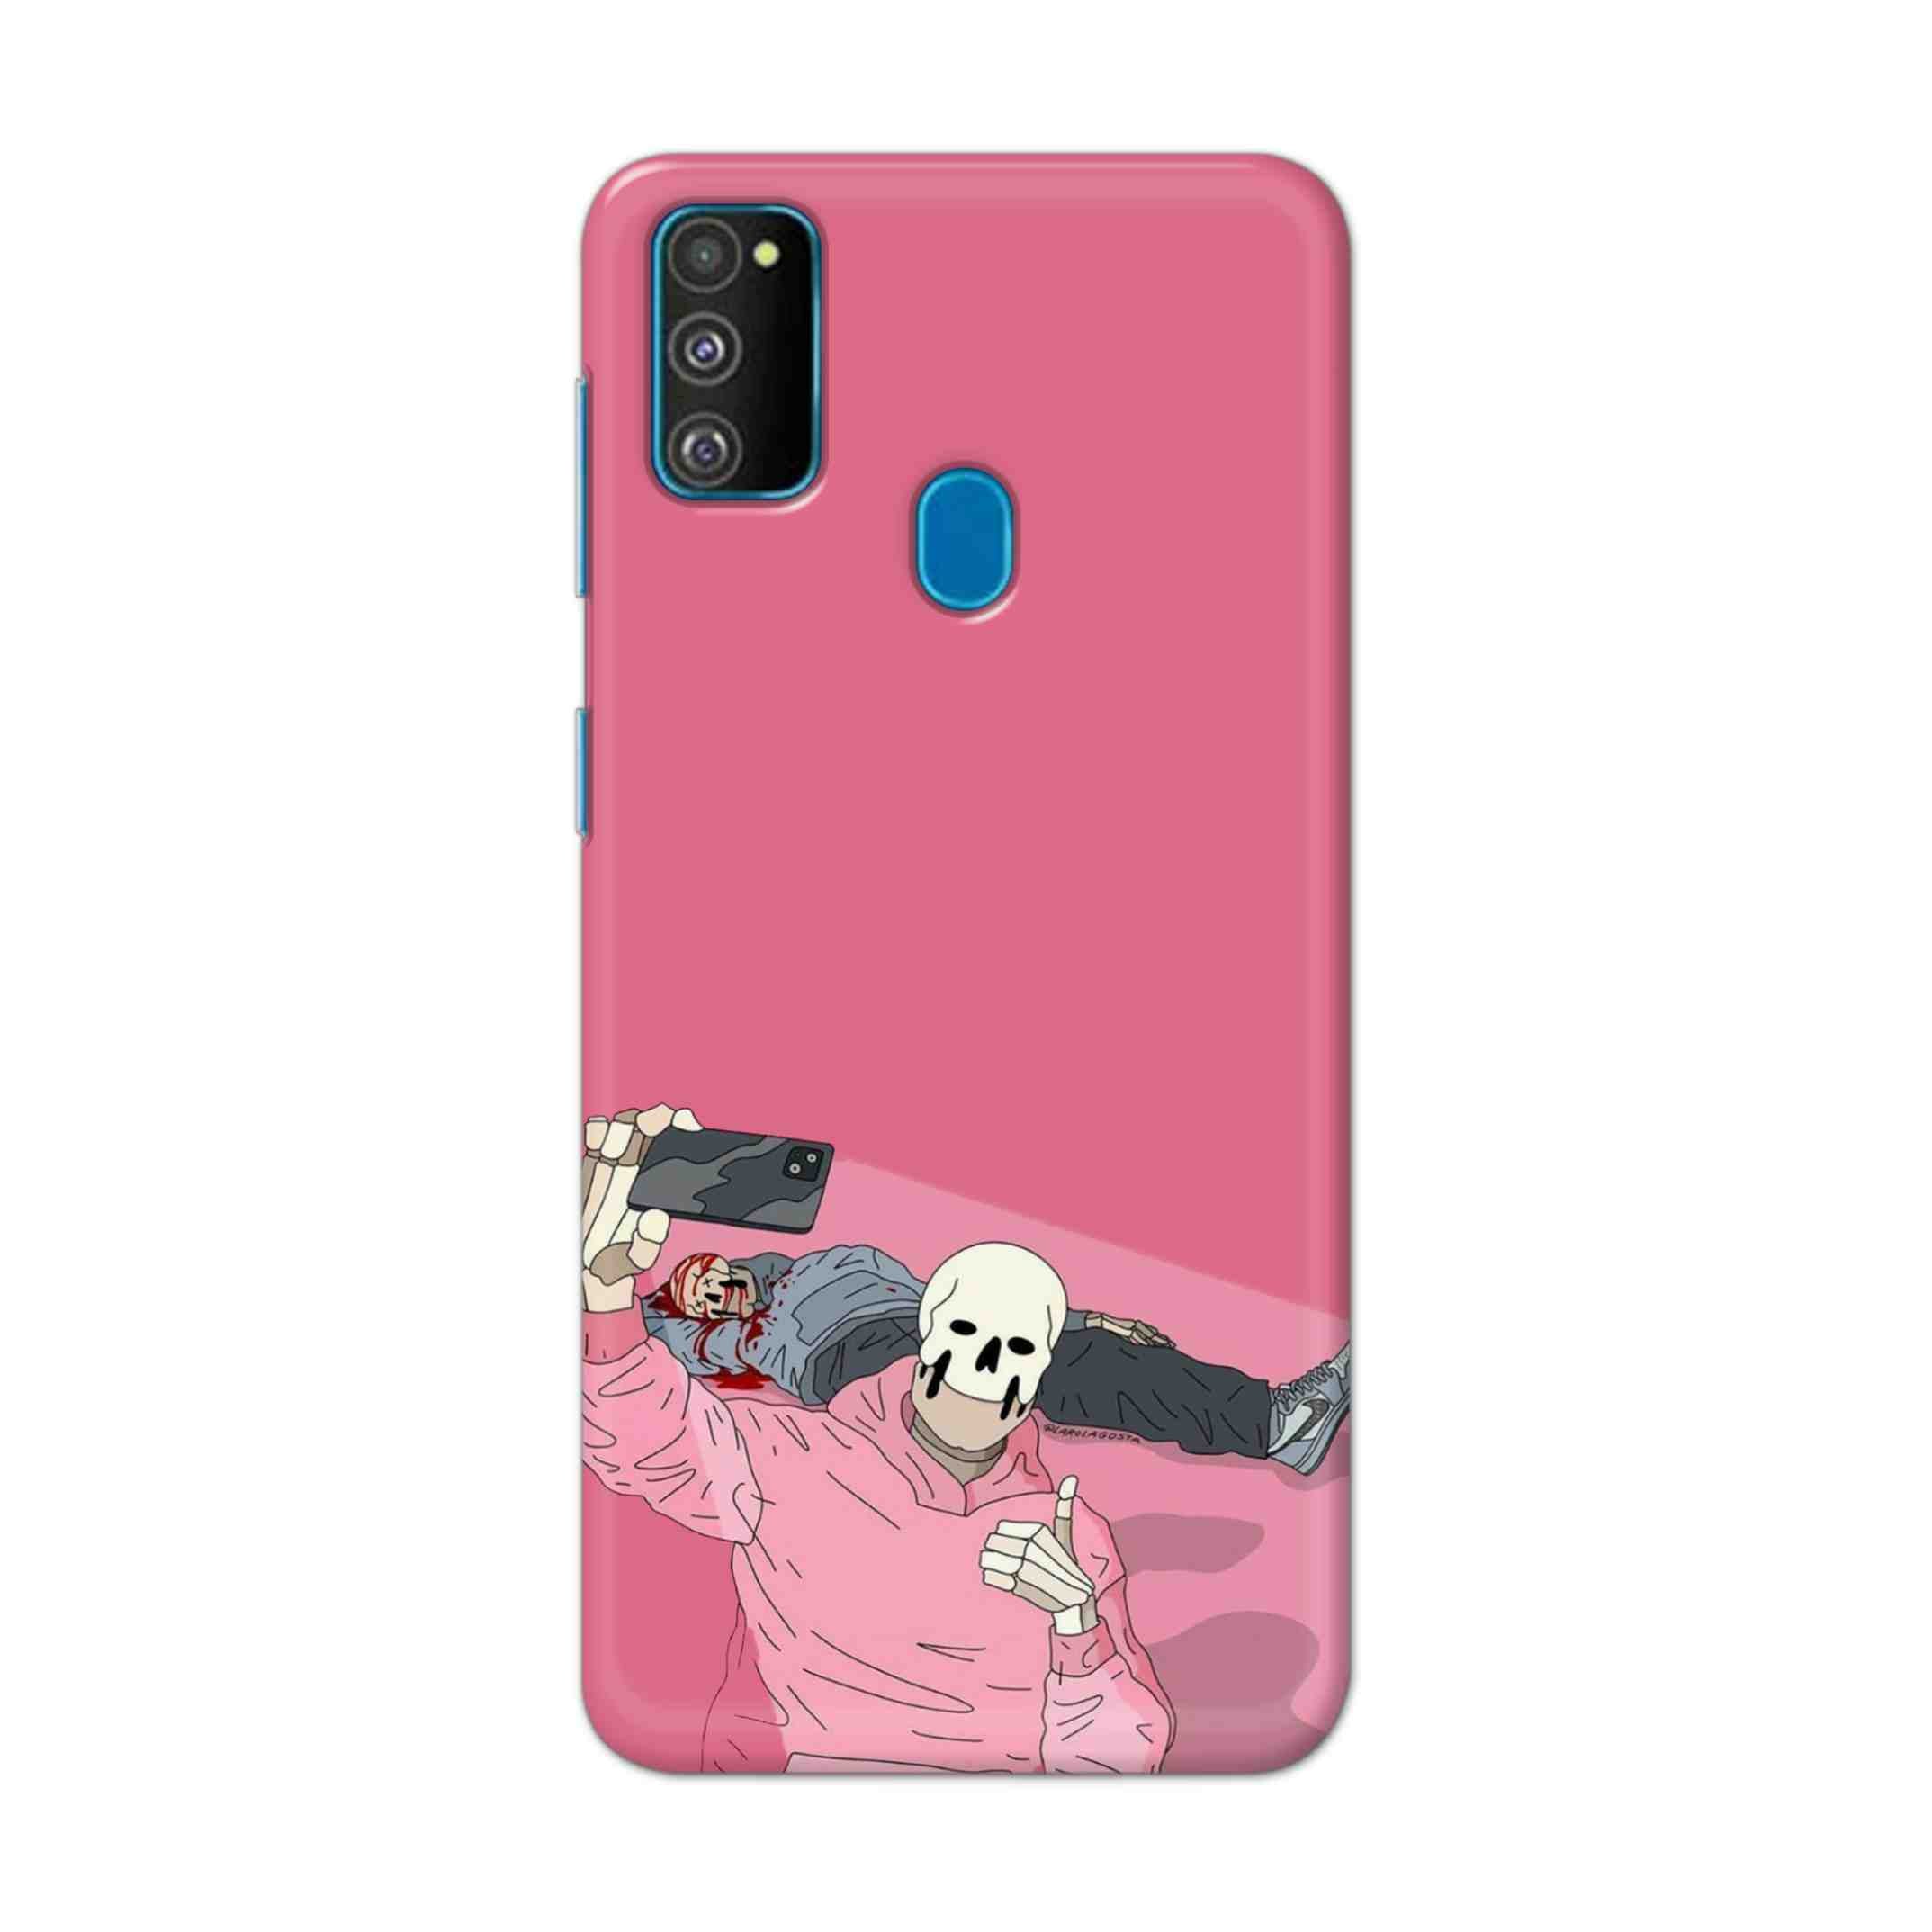 Buy Selfie Hard Back Mobile Phone Case Cover For Samsung Galaxy M30s Online